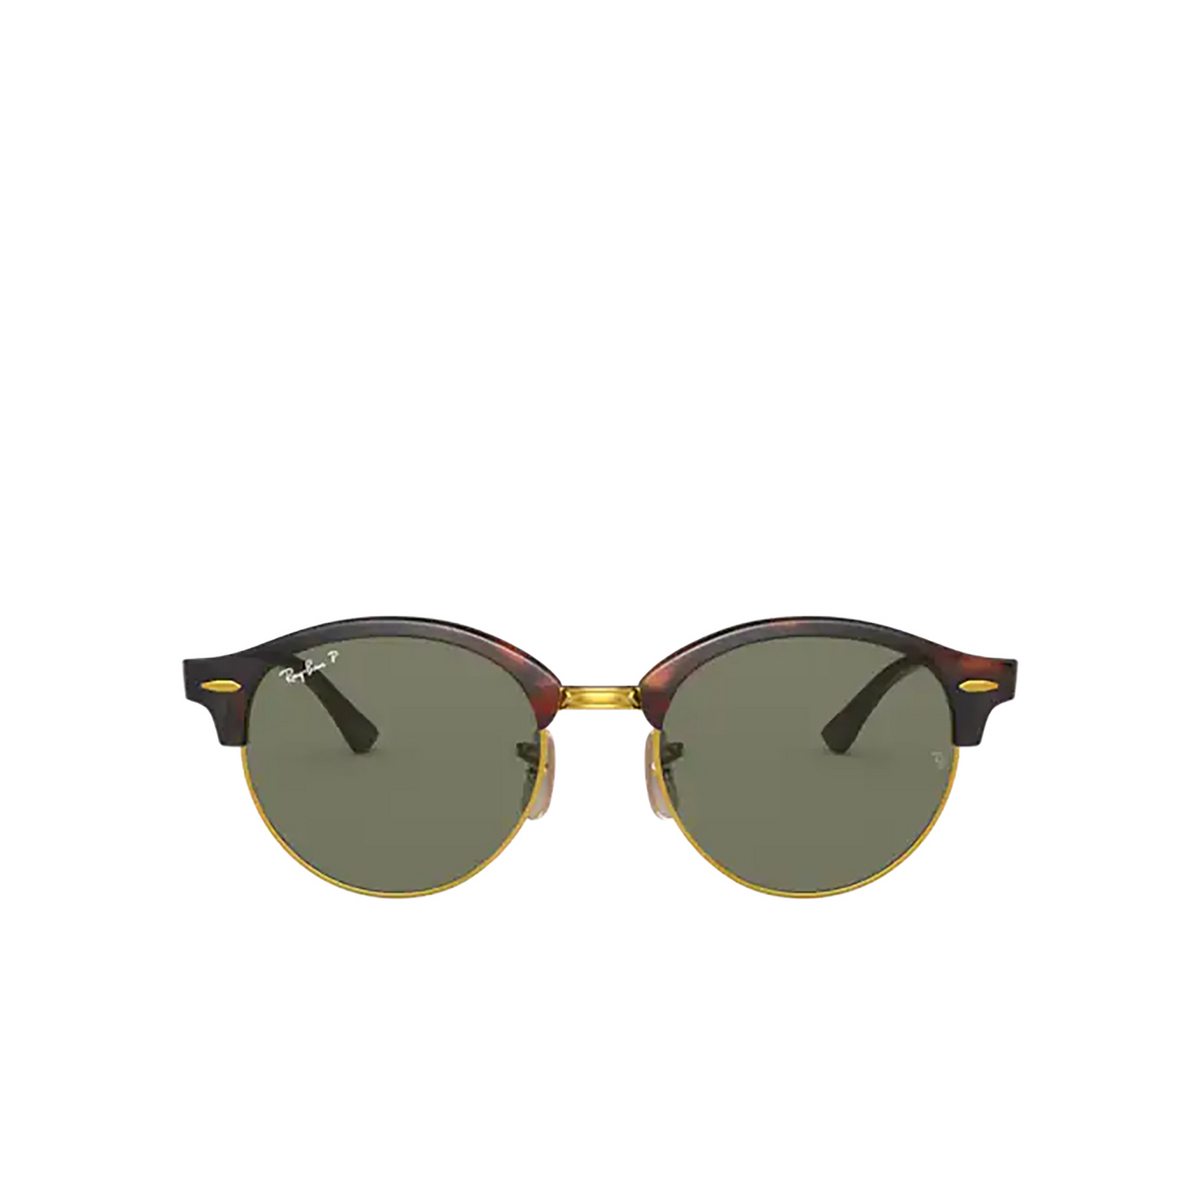 Ray-Ban CLUBROUND Sunglasses 990/58 Red Havana - front view